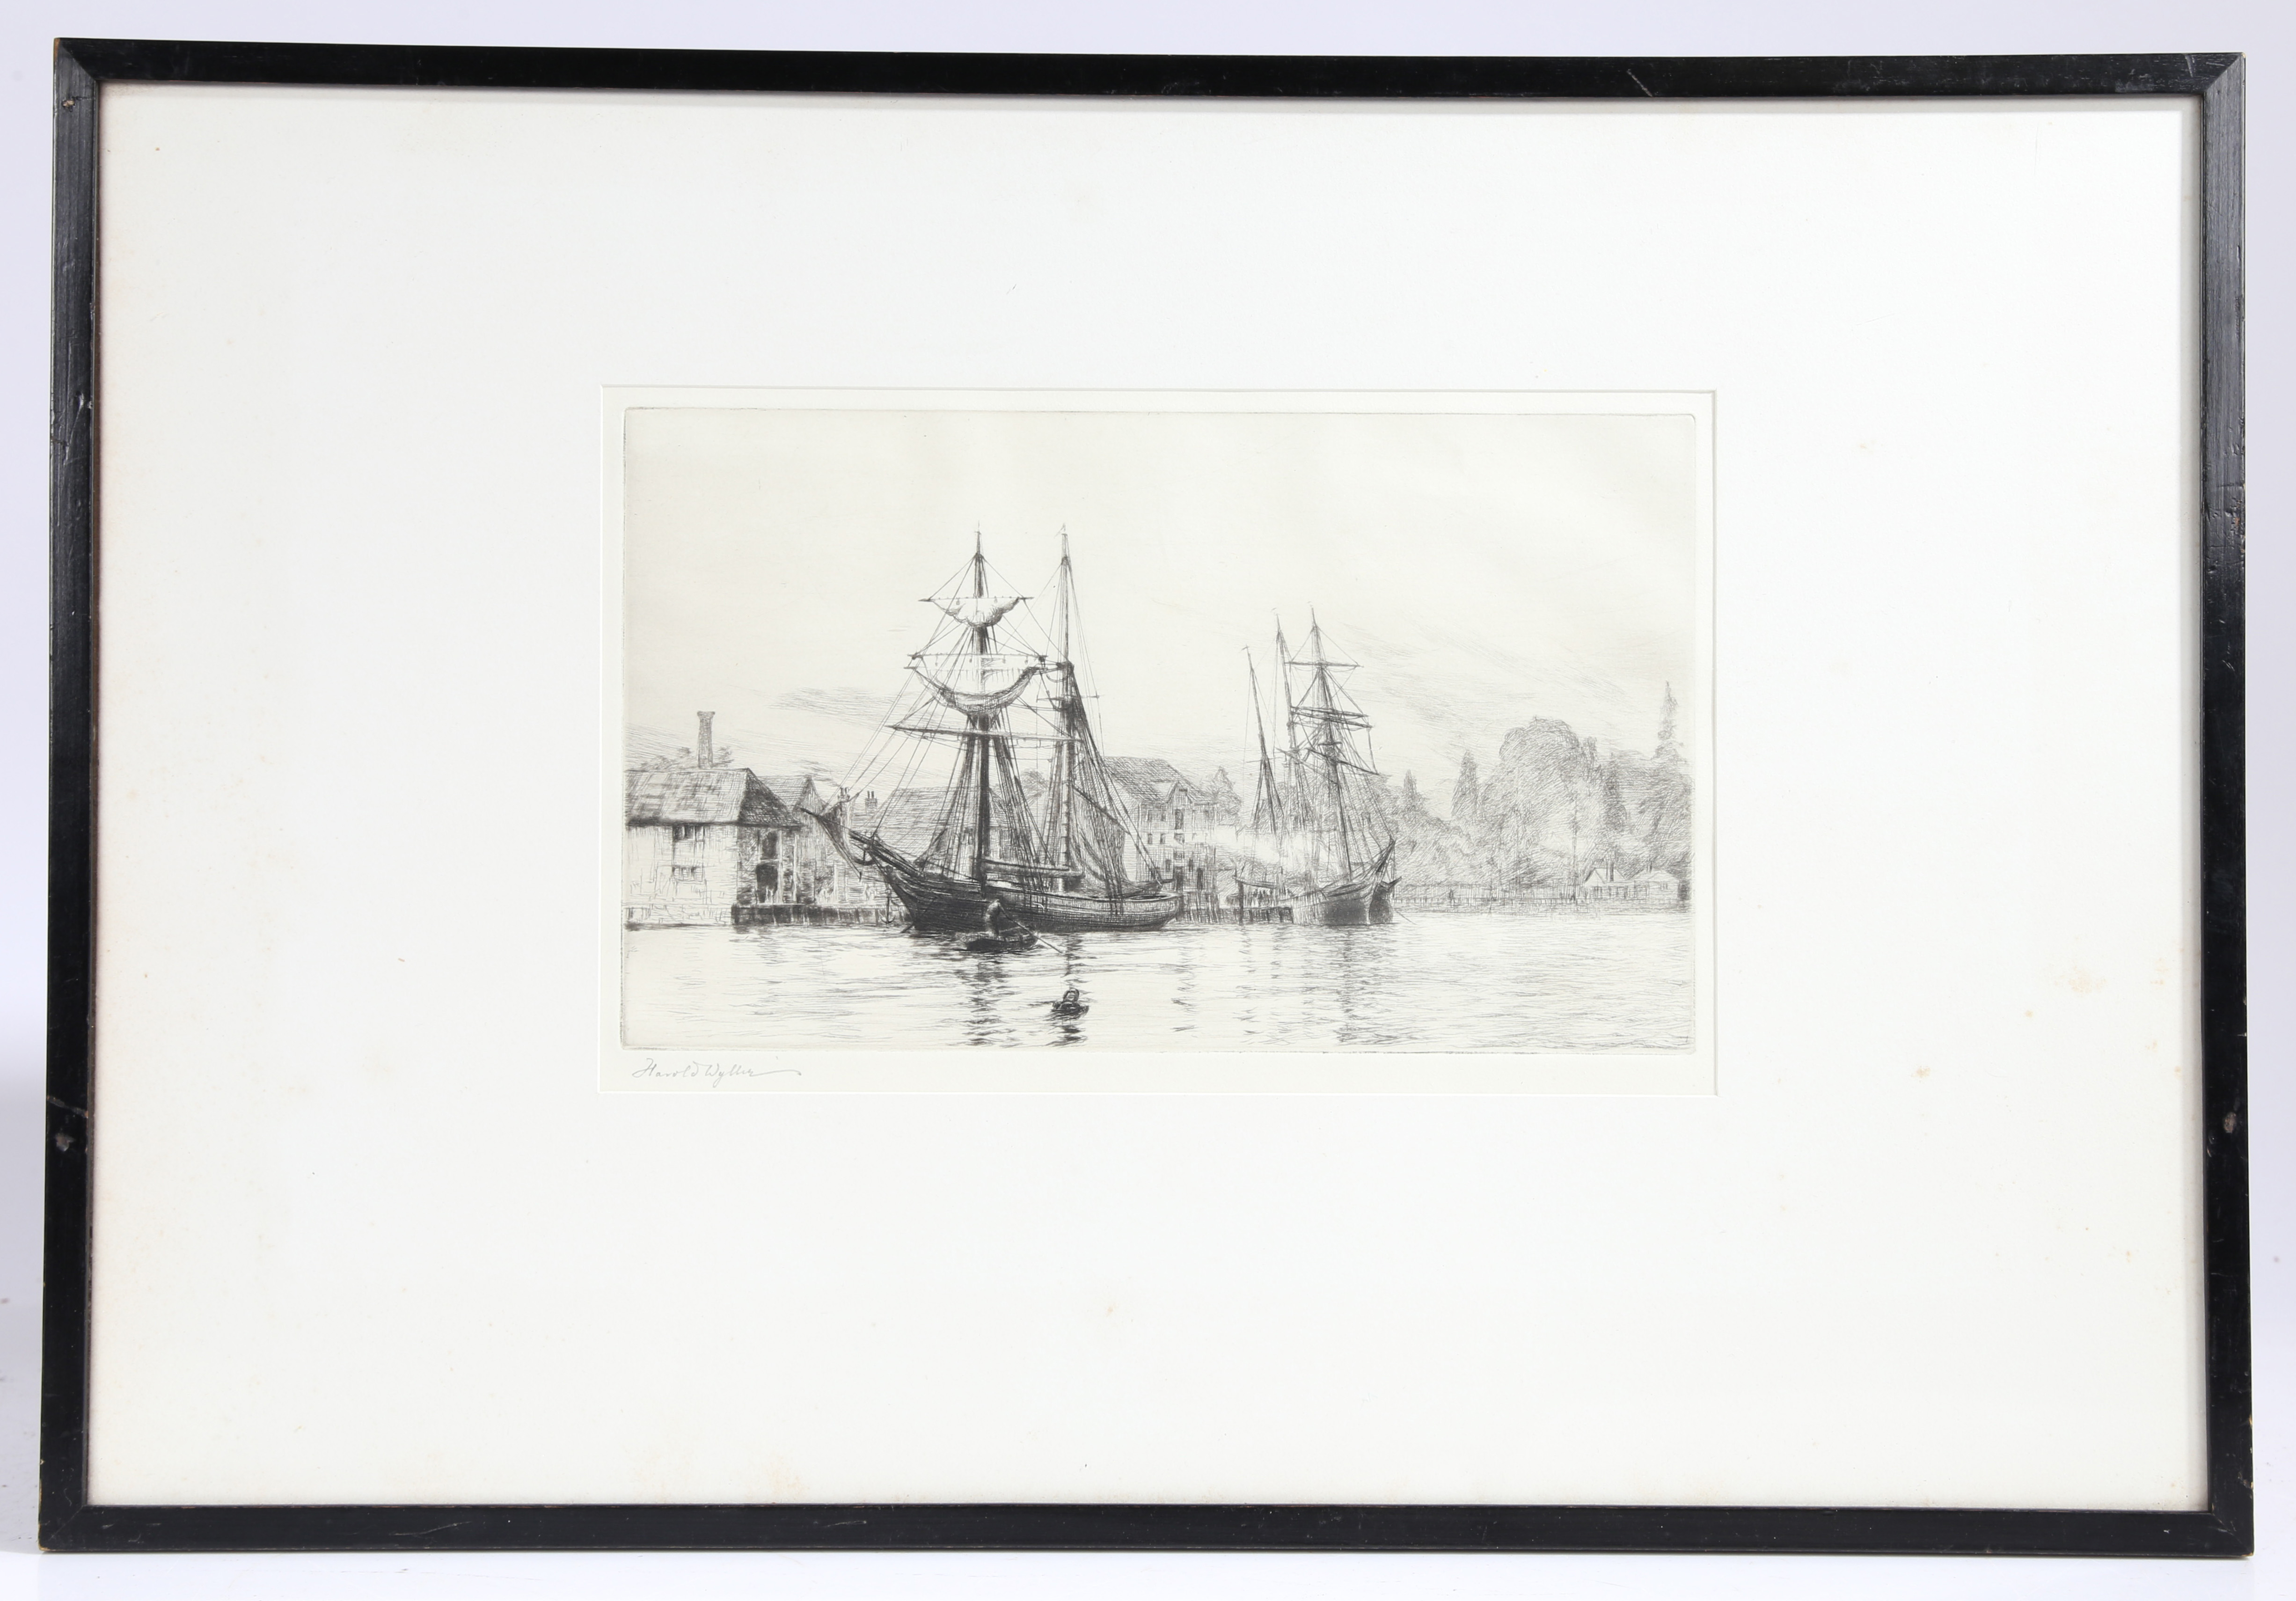 Harold Wyllie (British 1880-1973) "View of Sailing Ships at Harbor" Etching signed lower left housed